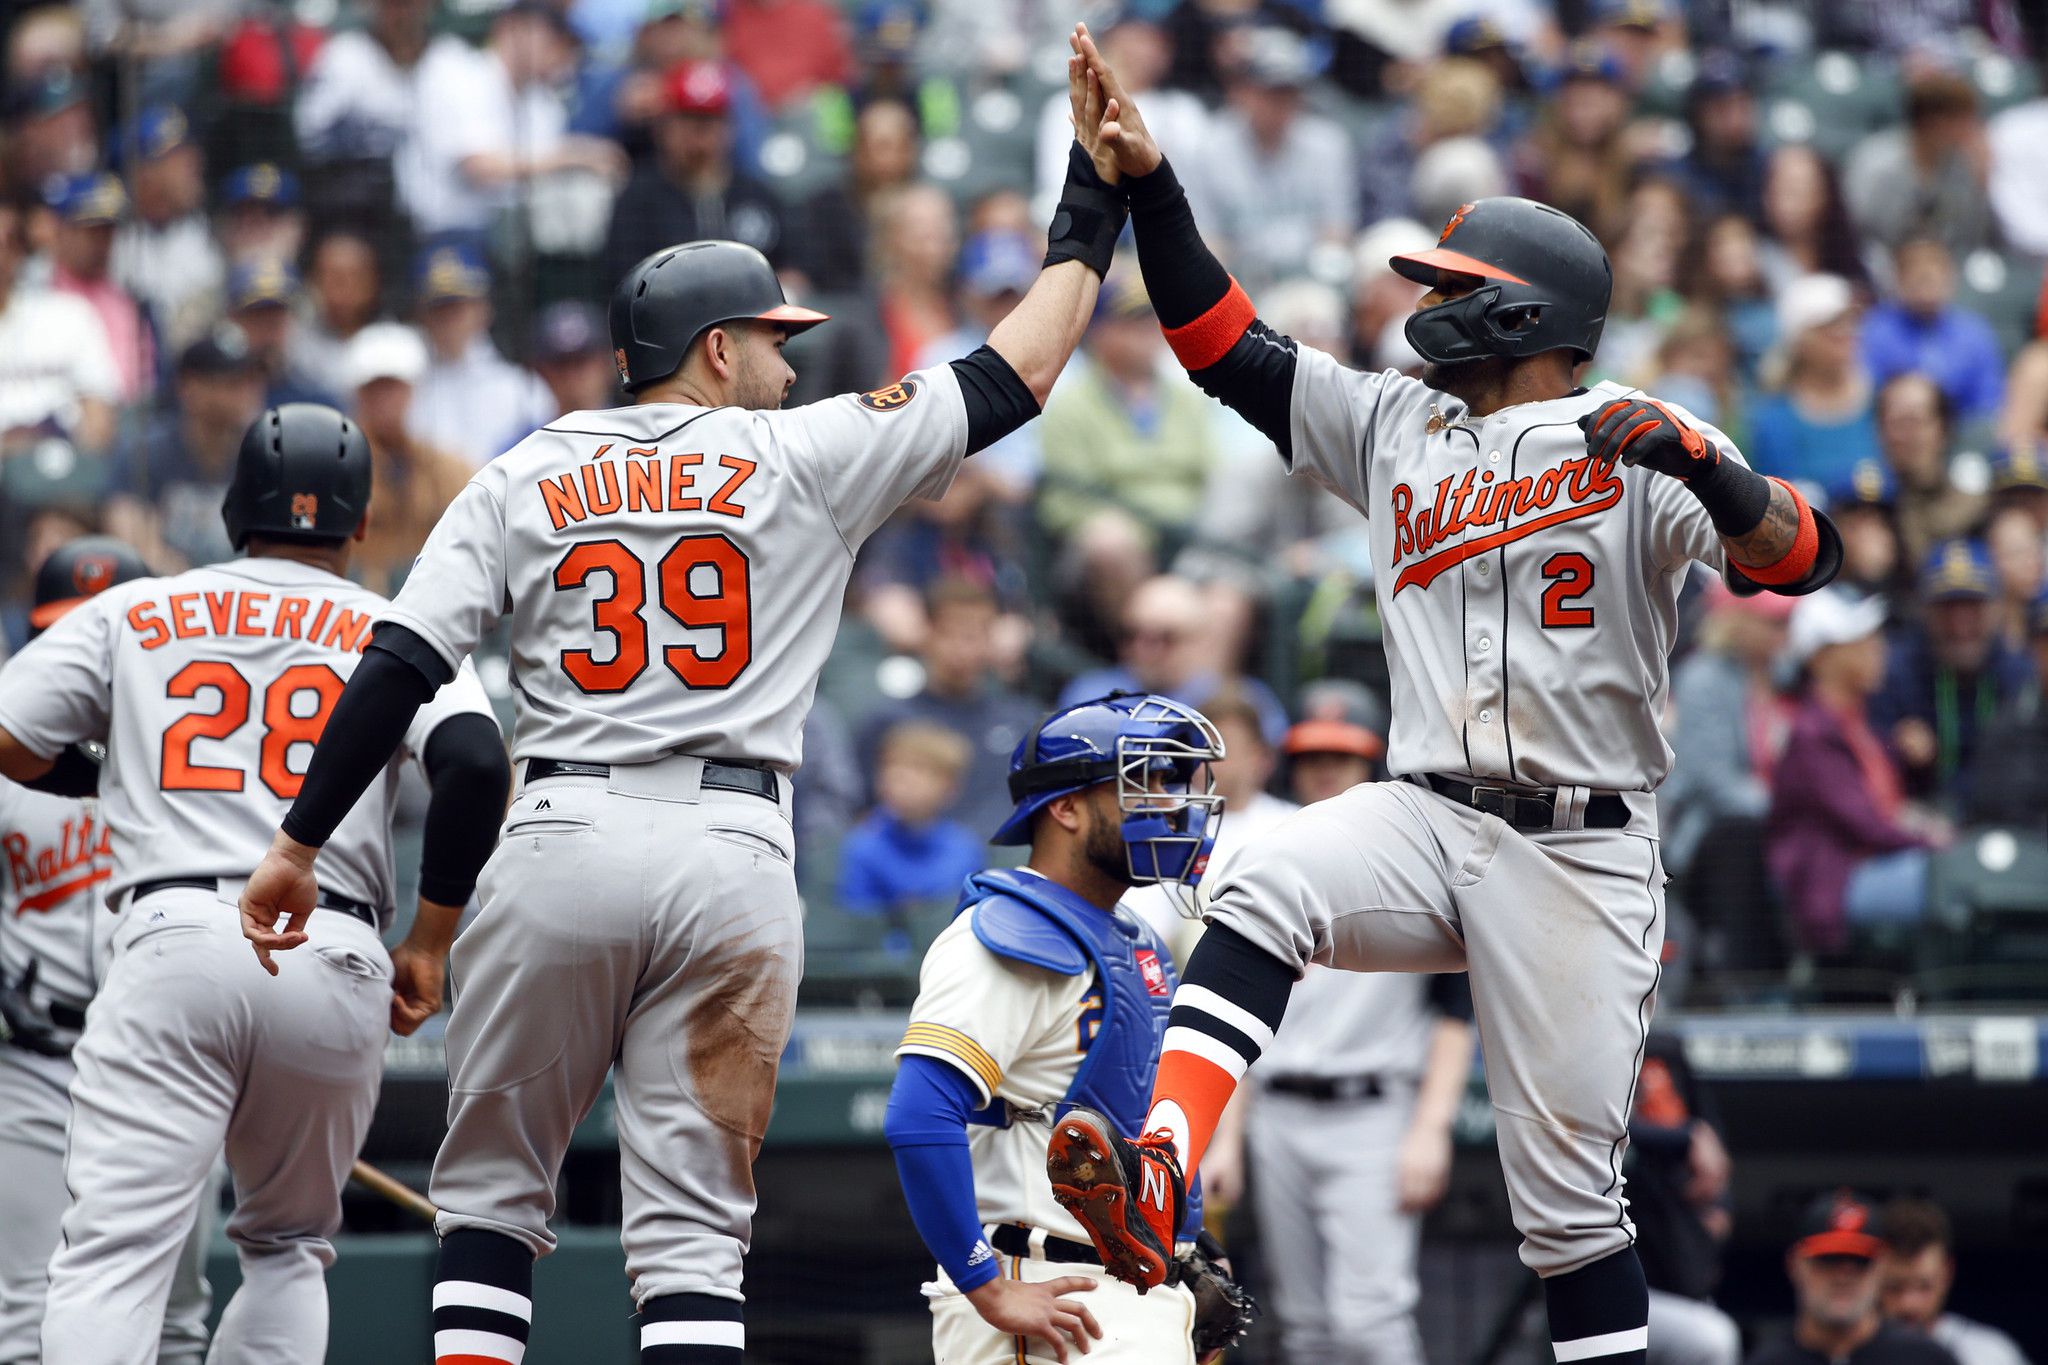 Orioles 'Turn Back the Clock' to beat Mariners, 8-4, and end season